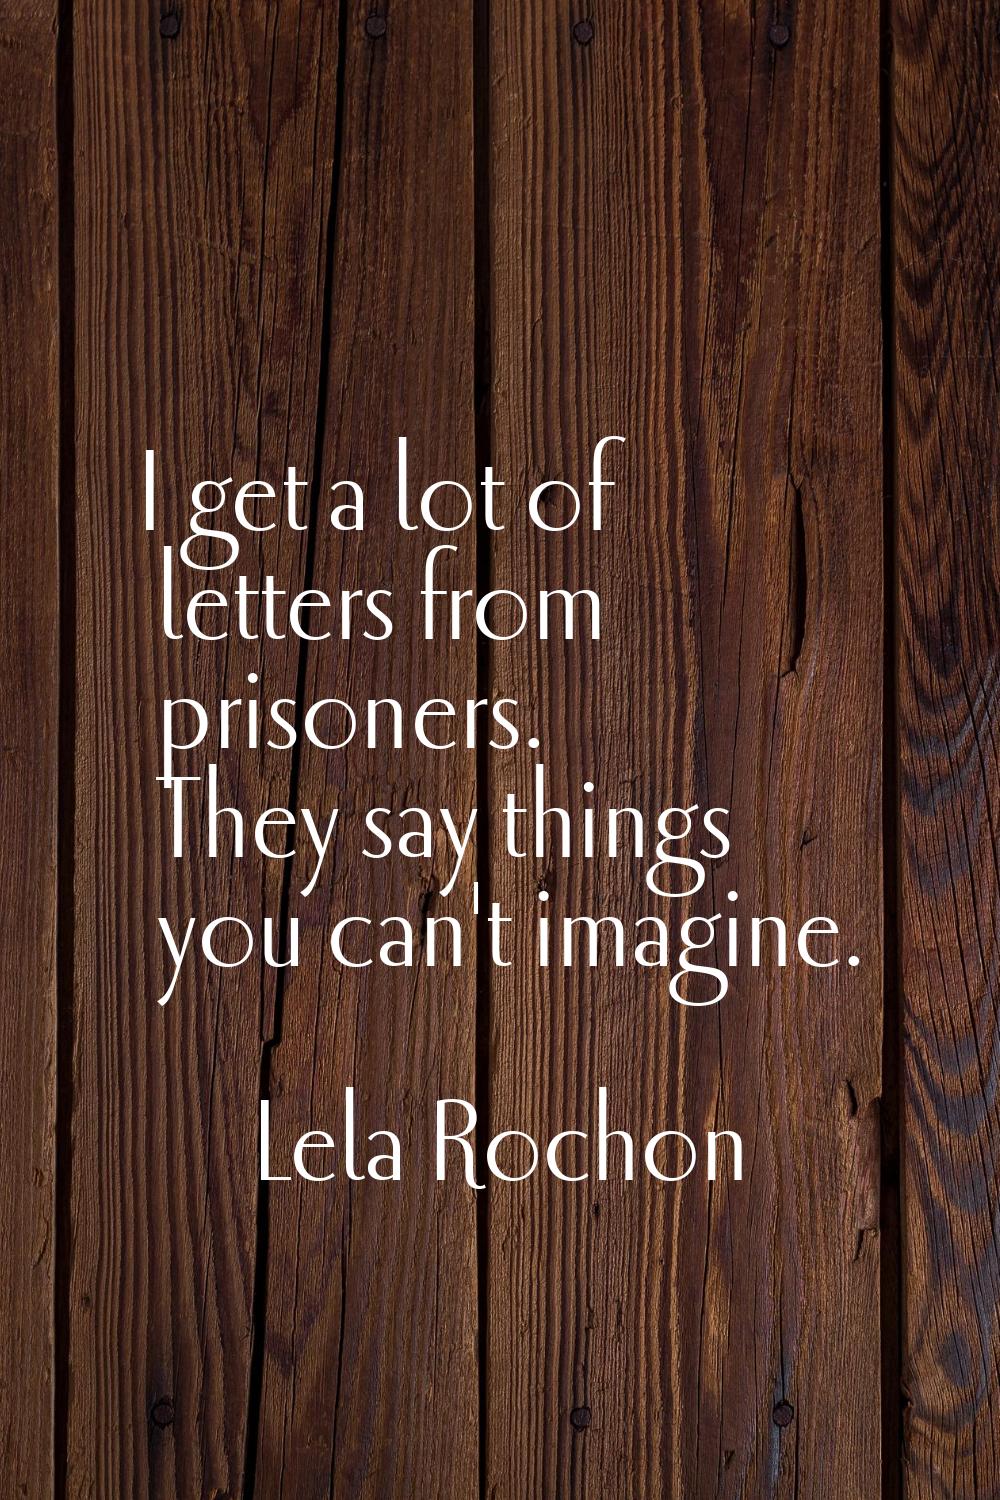 I get a lot of letters from prisoners. They say things you can't imagine.